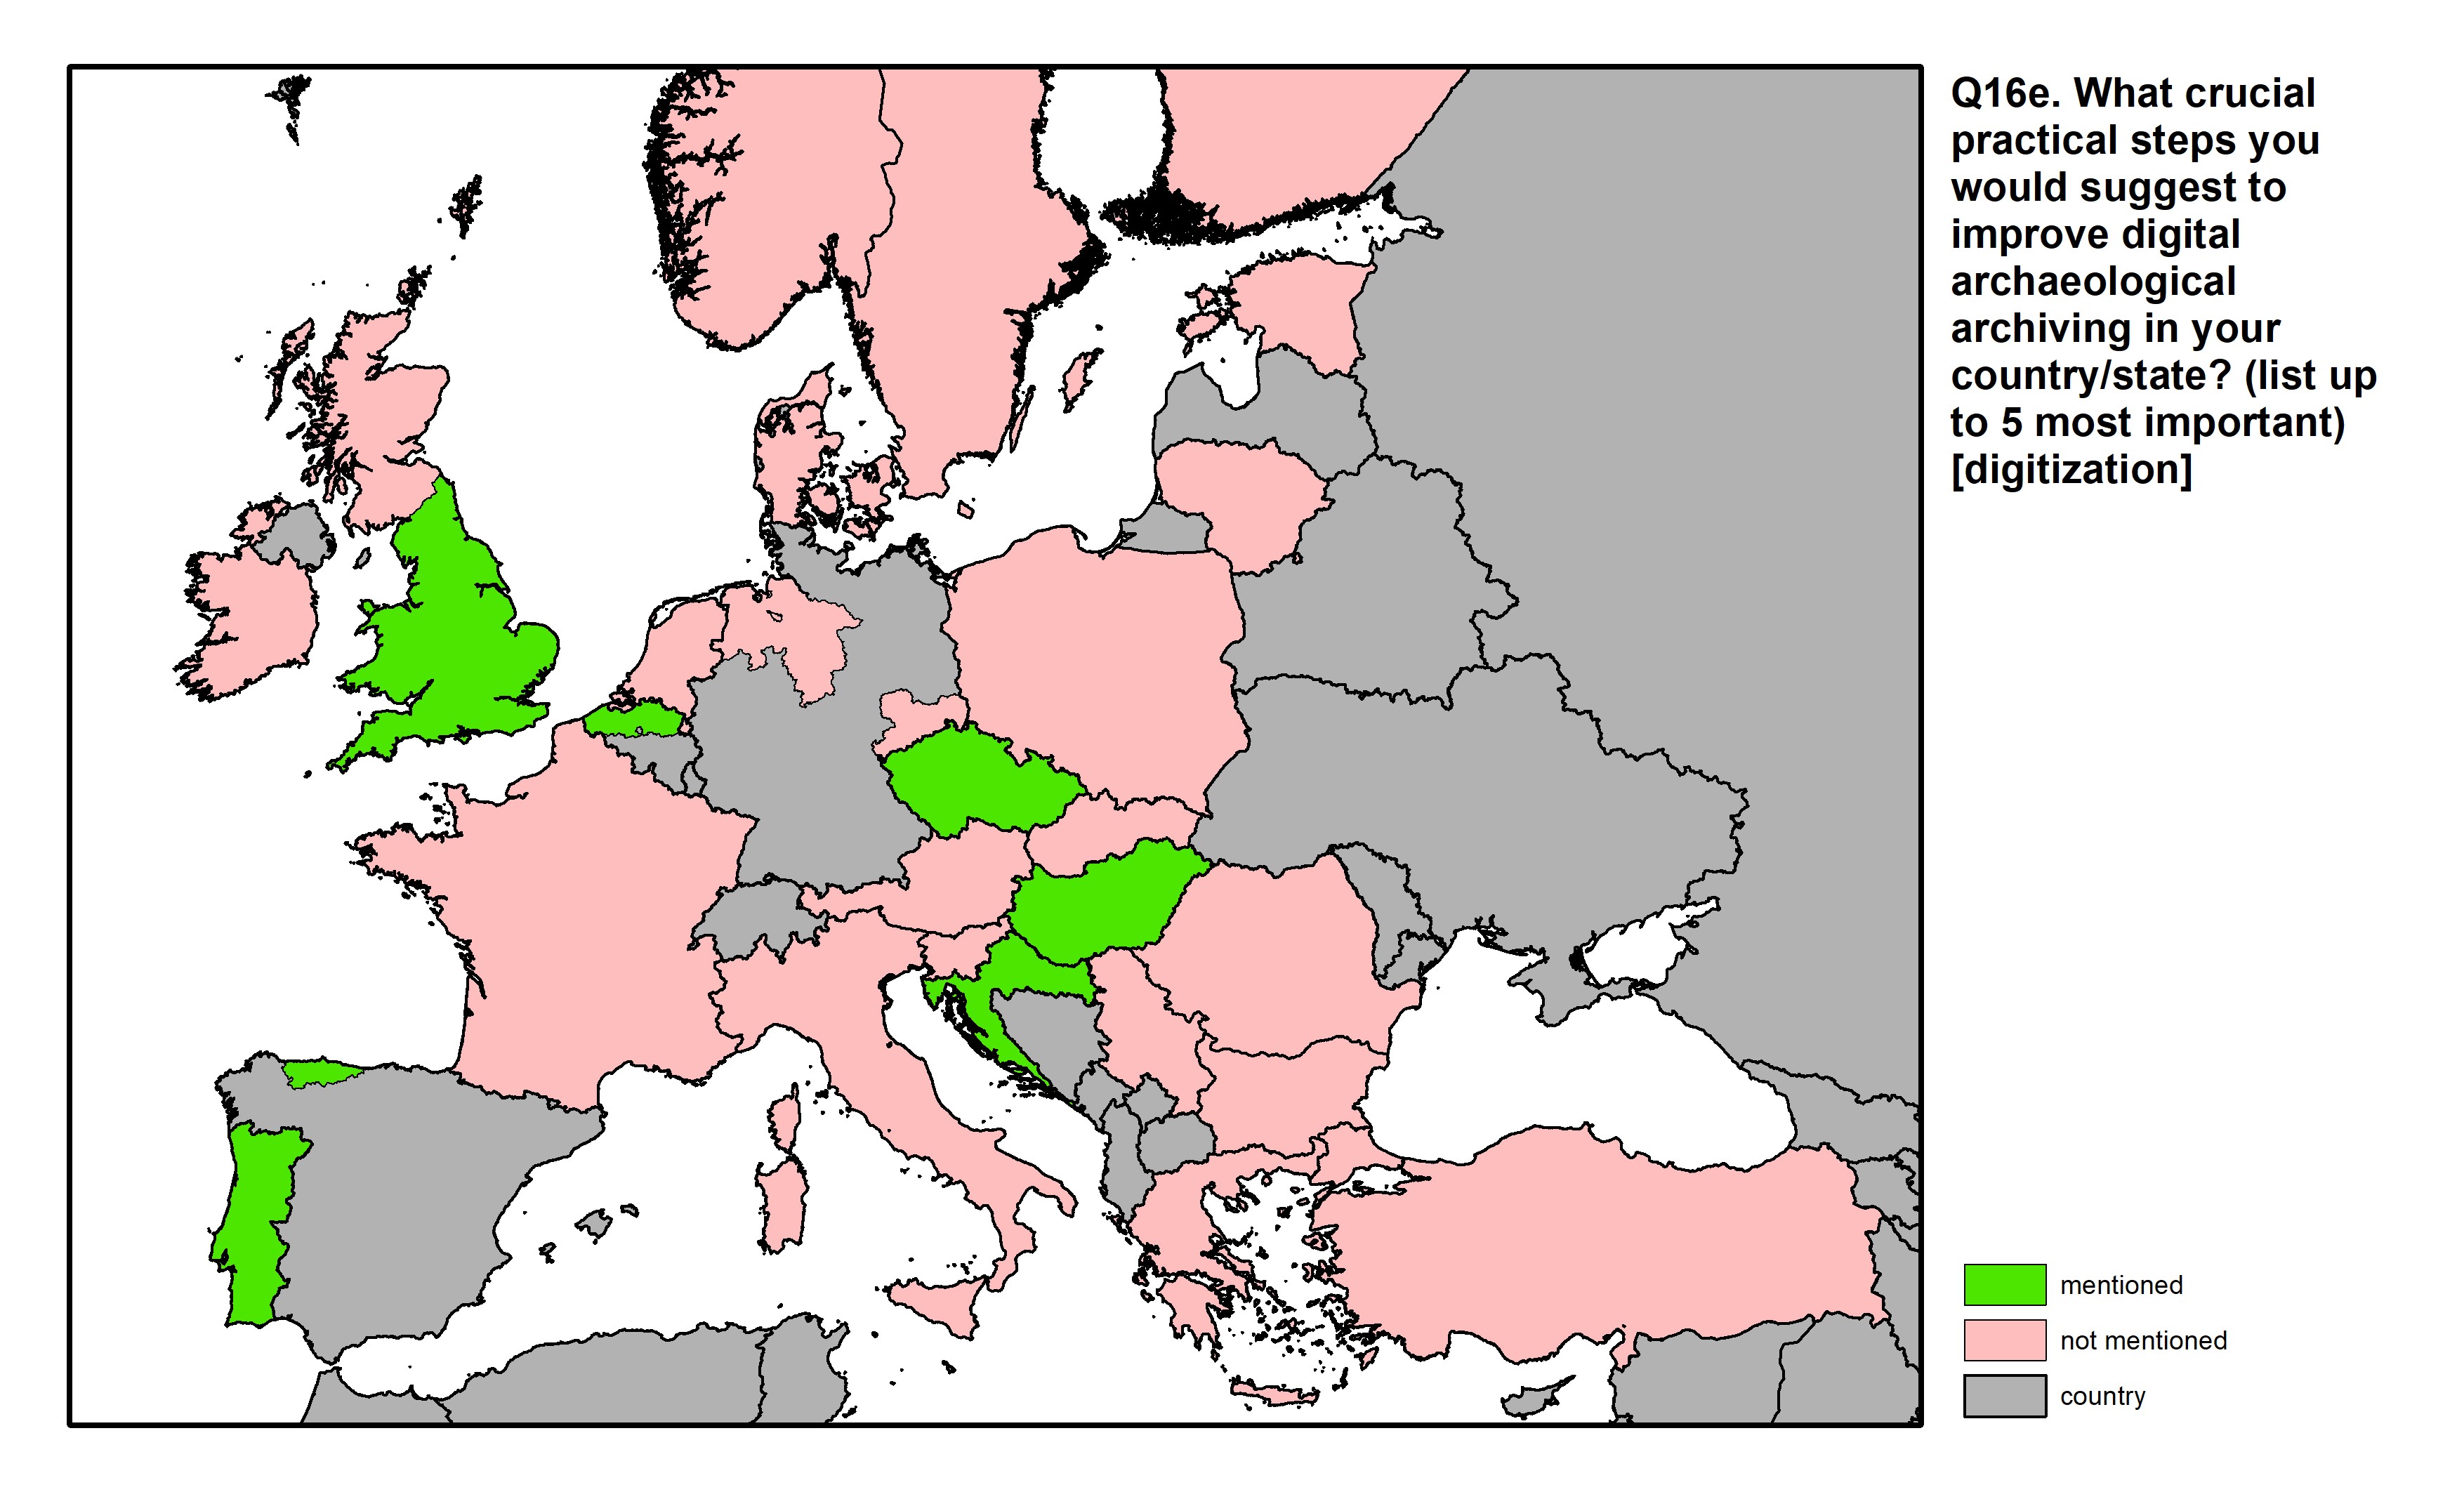 Figure 60: a map of Europe showing countries and regions in colour based on response rates to the survey question.